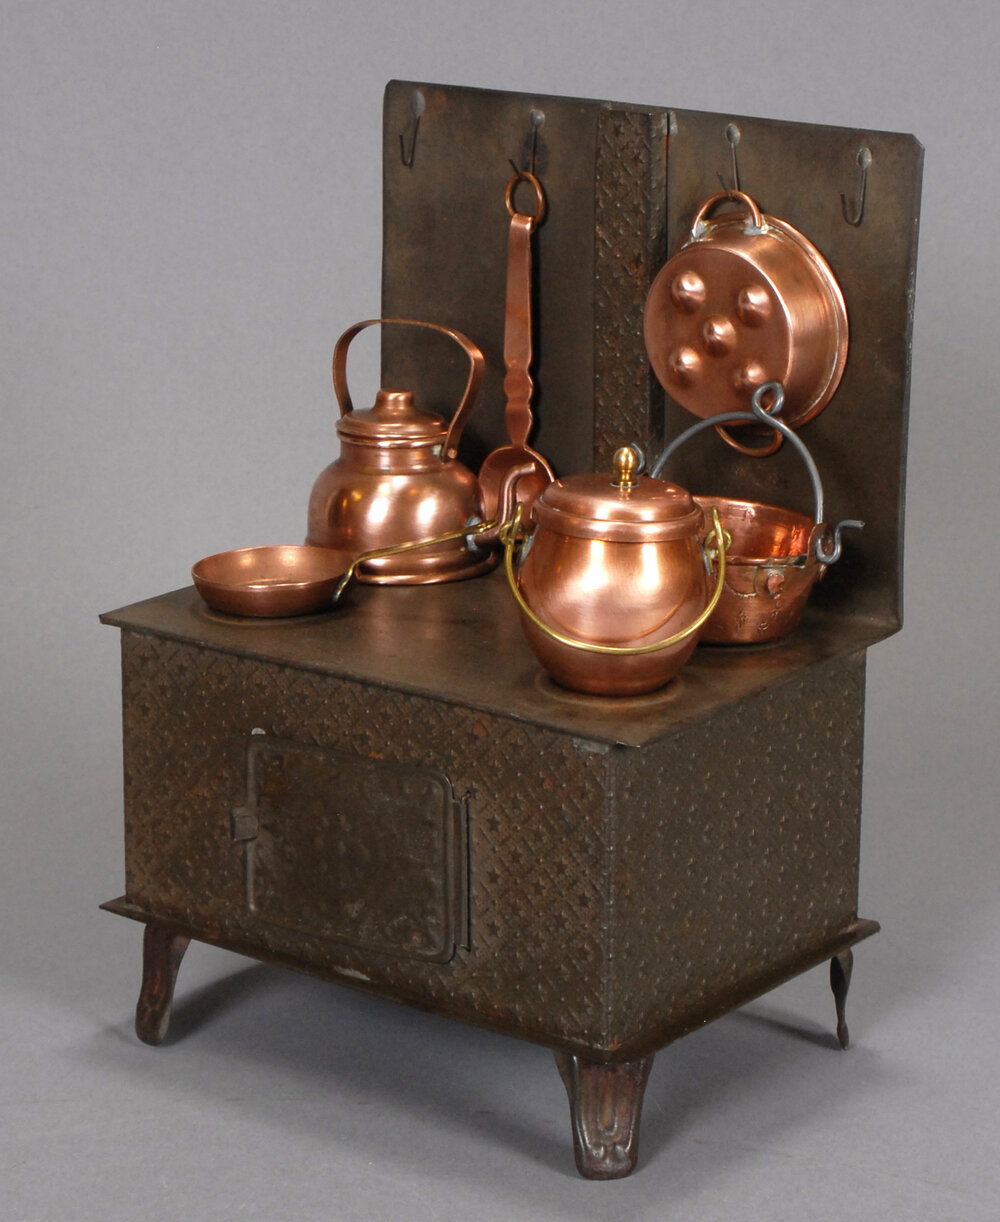 Miniature Cooking Candle Stove and Copper Pot Set for Real Cooking 